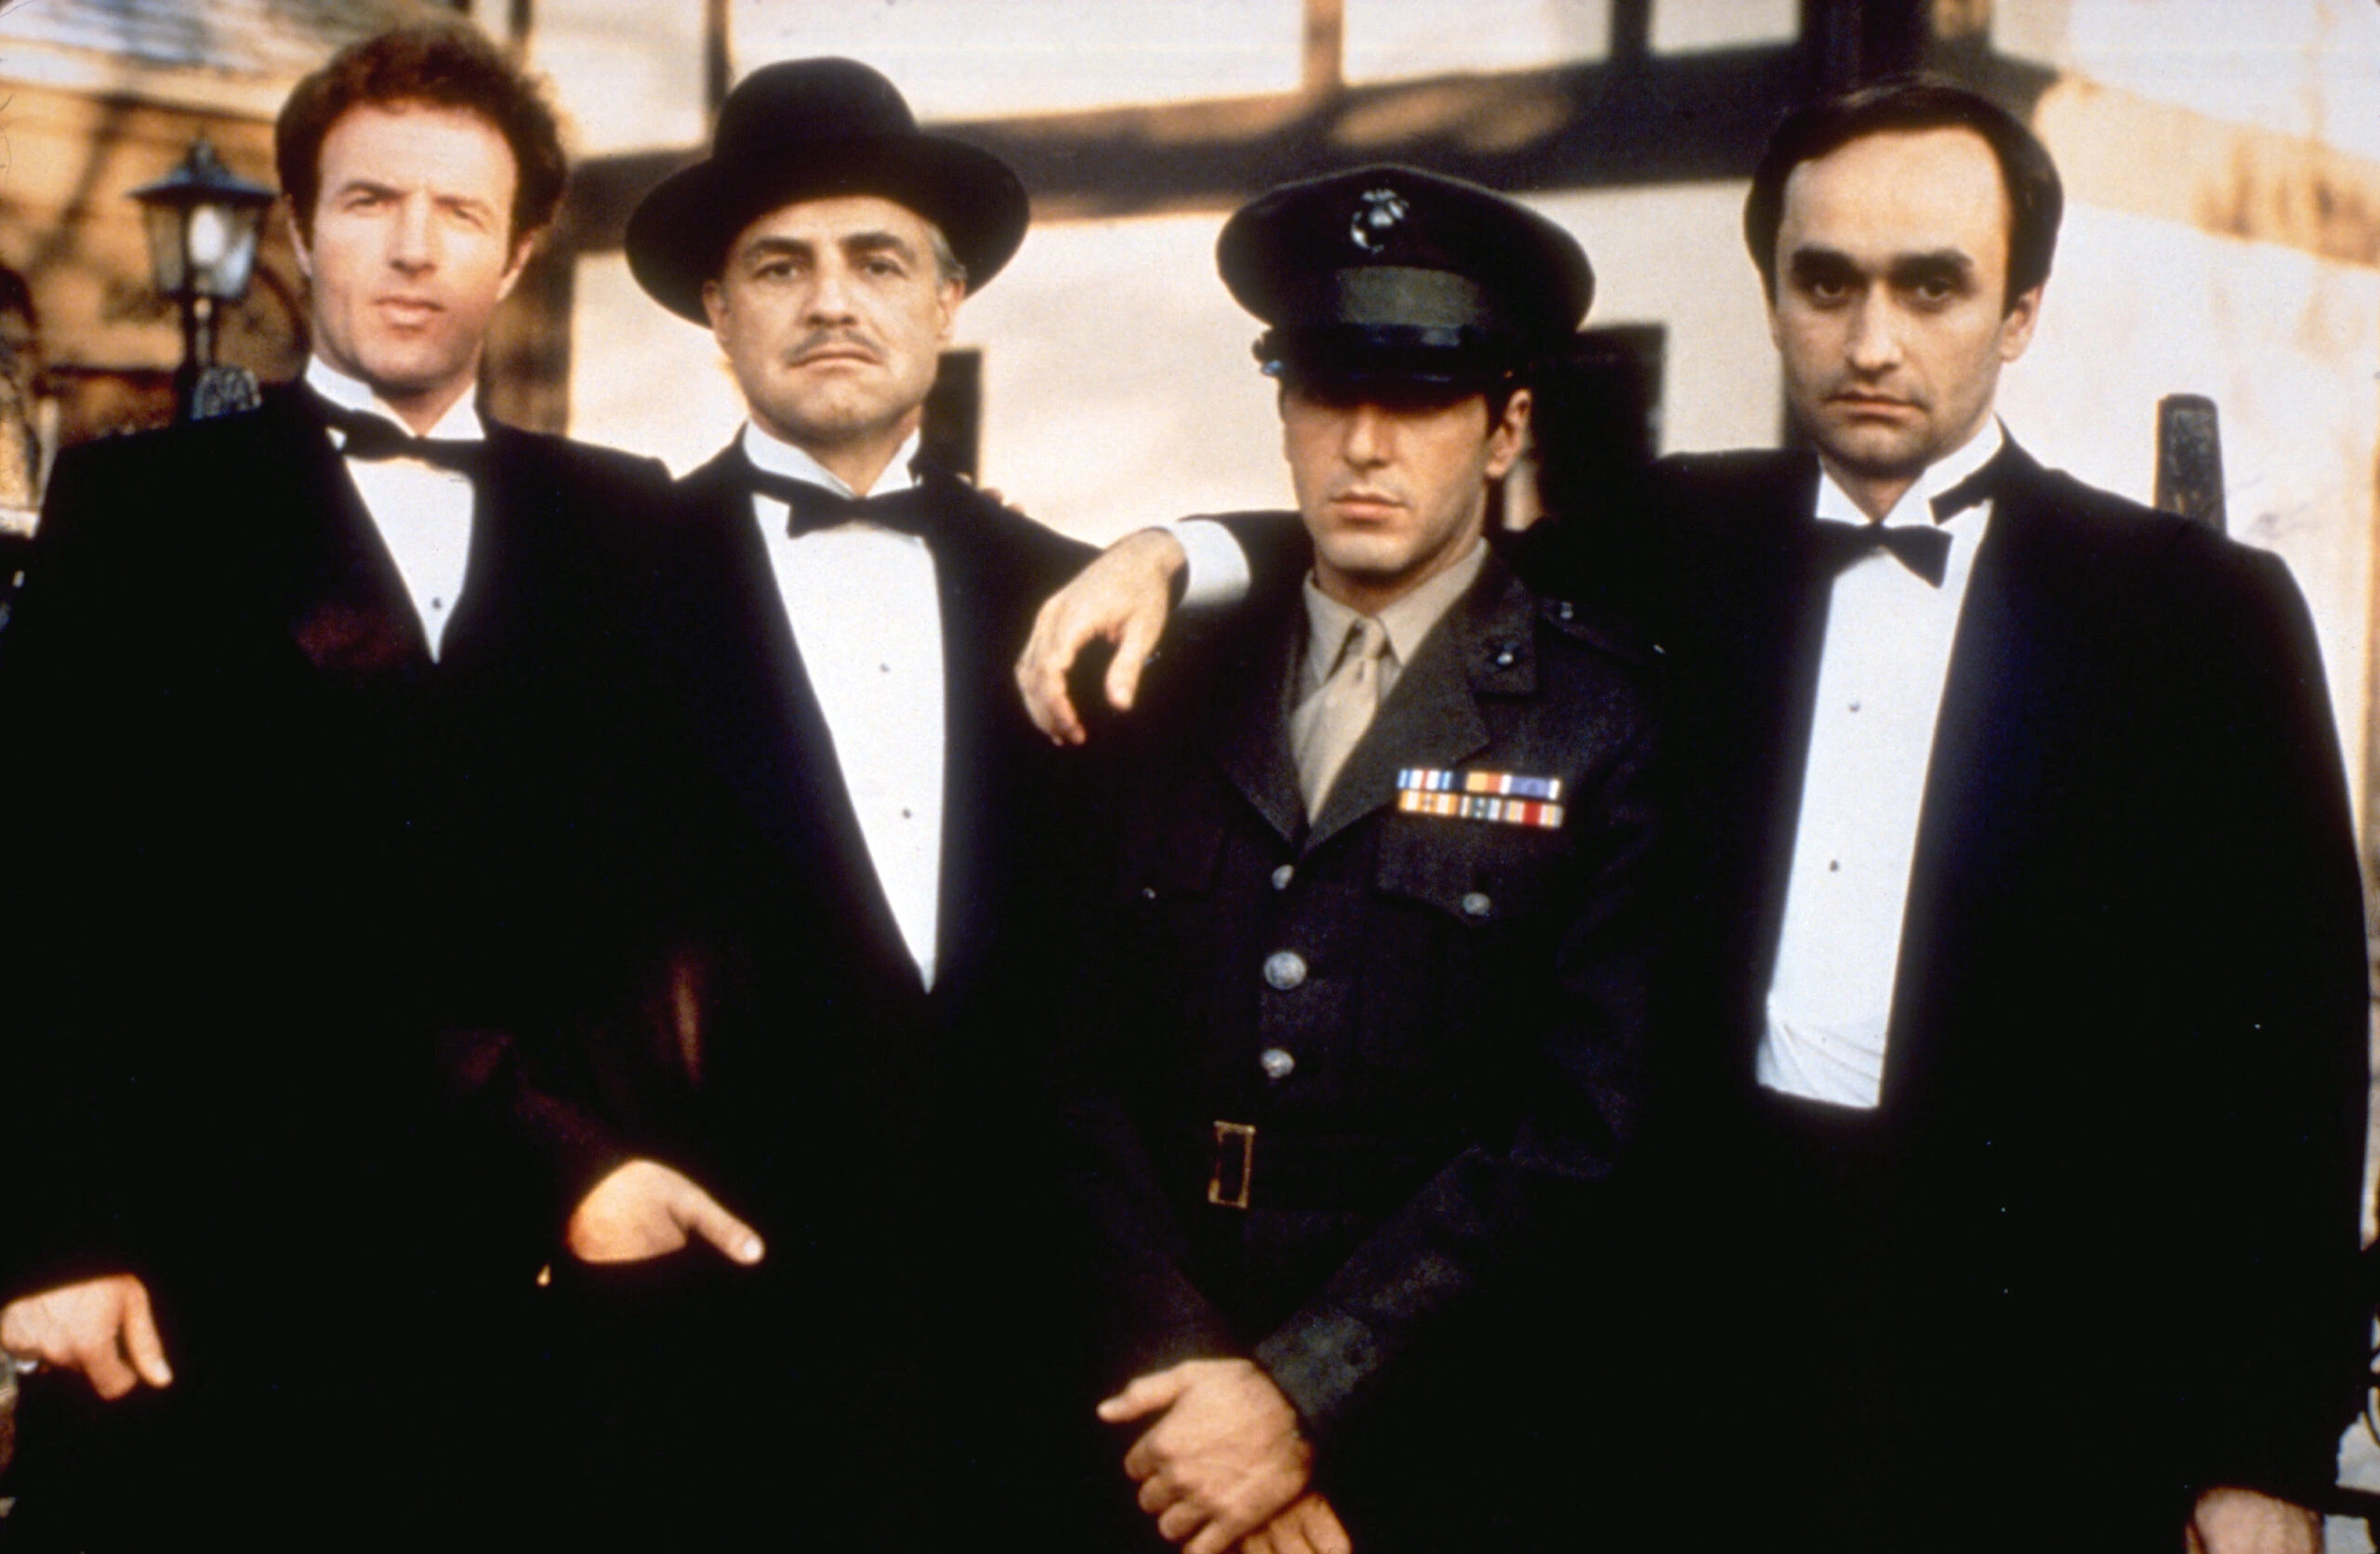 ‘The Godfather’ Trilogy Celebrates 50th Anniversary With 4K Ultra HD Trailer